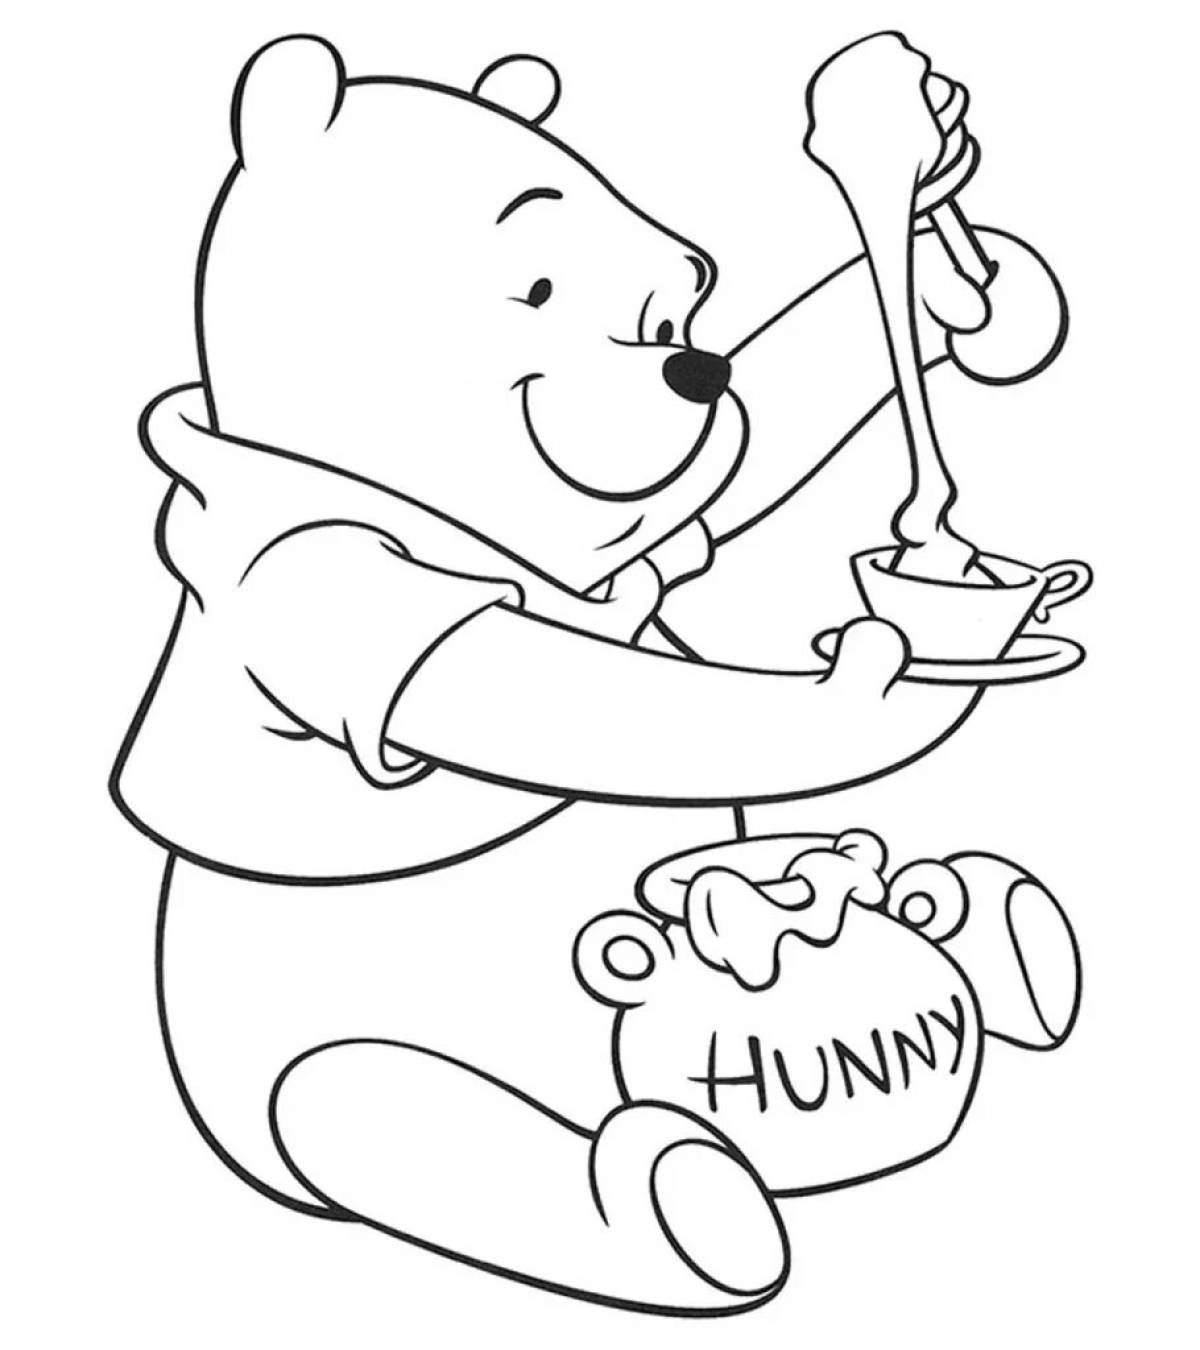 Coloring cherished bear with honey